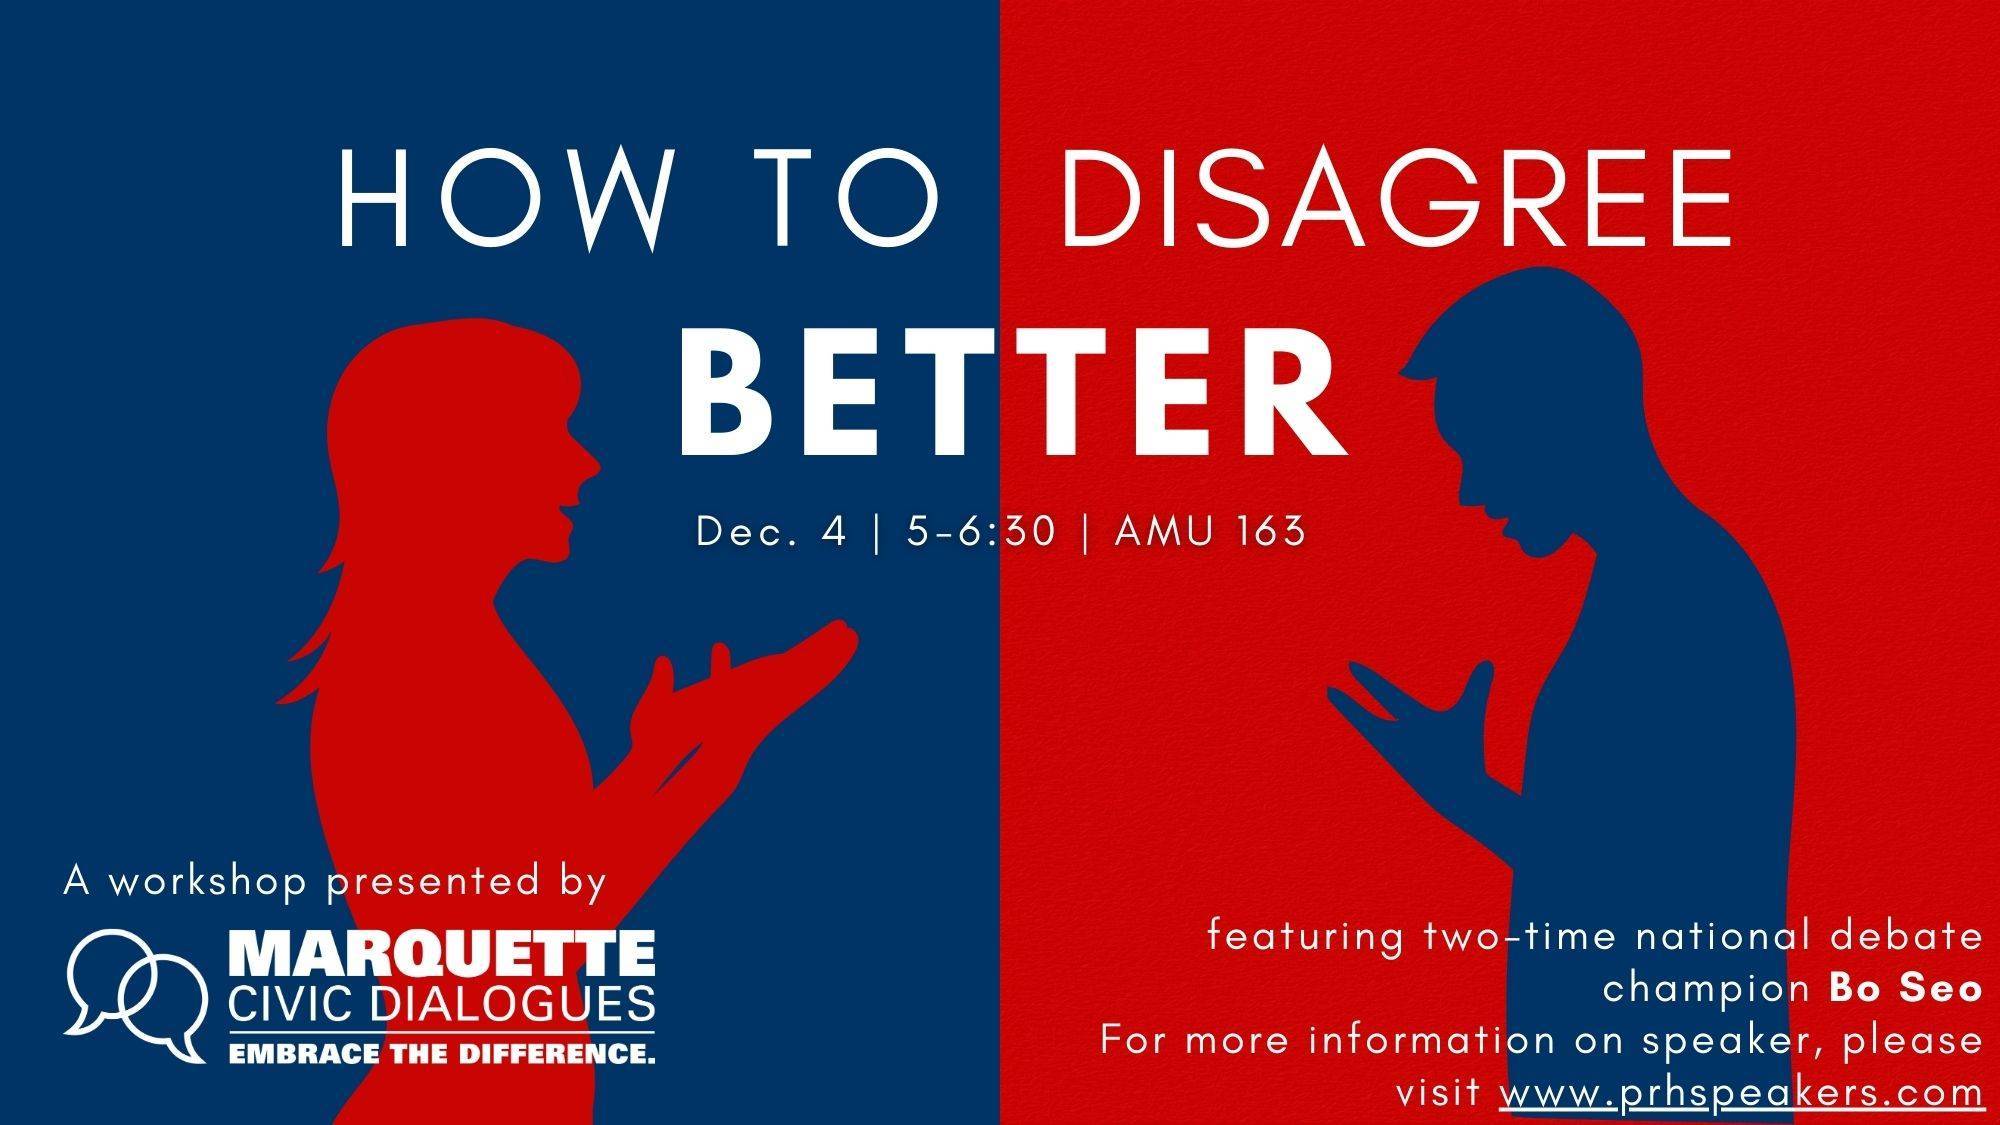 Workshop:  "How to Disagree Better" w/ Two-Time World Debate Champion Bo Seo